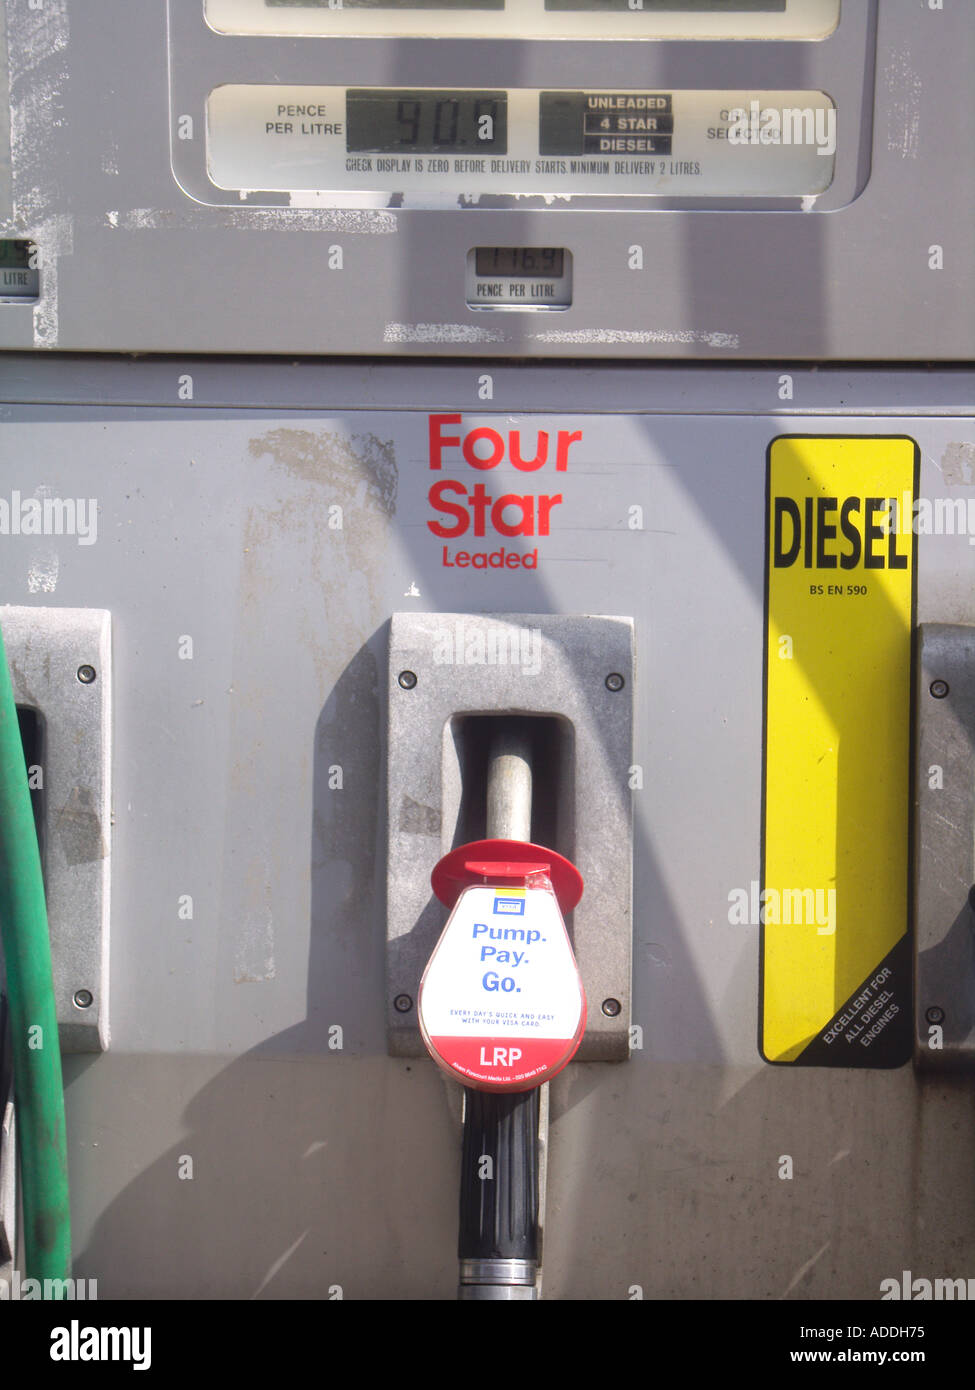 Petrol pumps at a garage - Diesel and Four Star leaded petrol